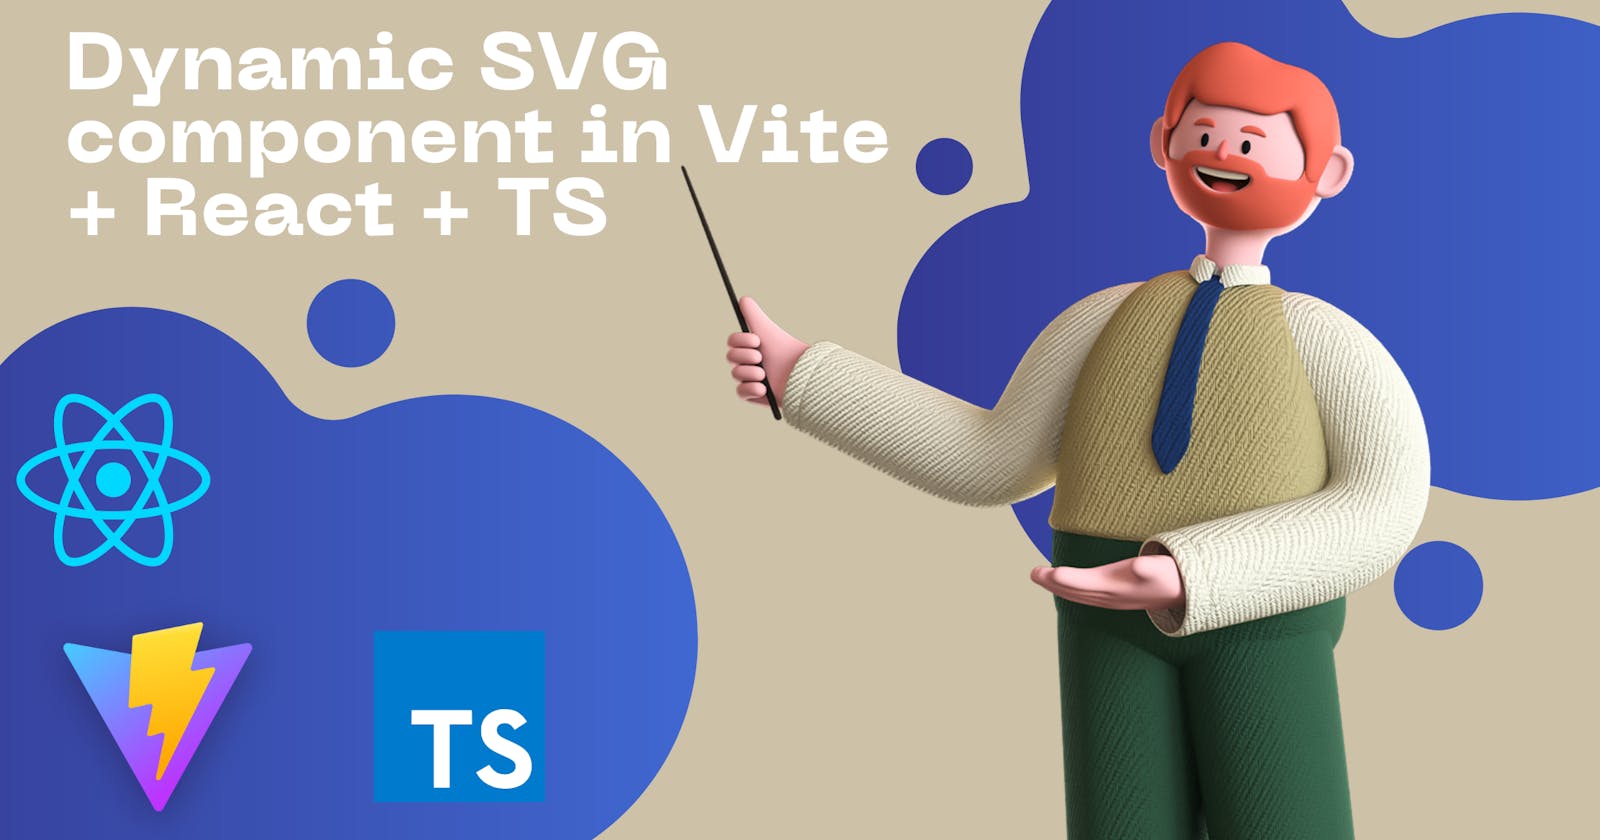 Dynamic SVG component in Vite + React + TS